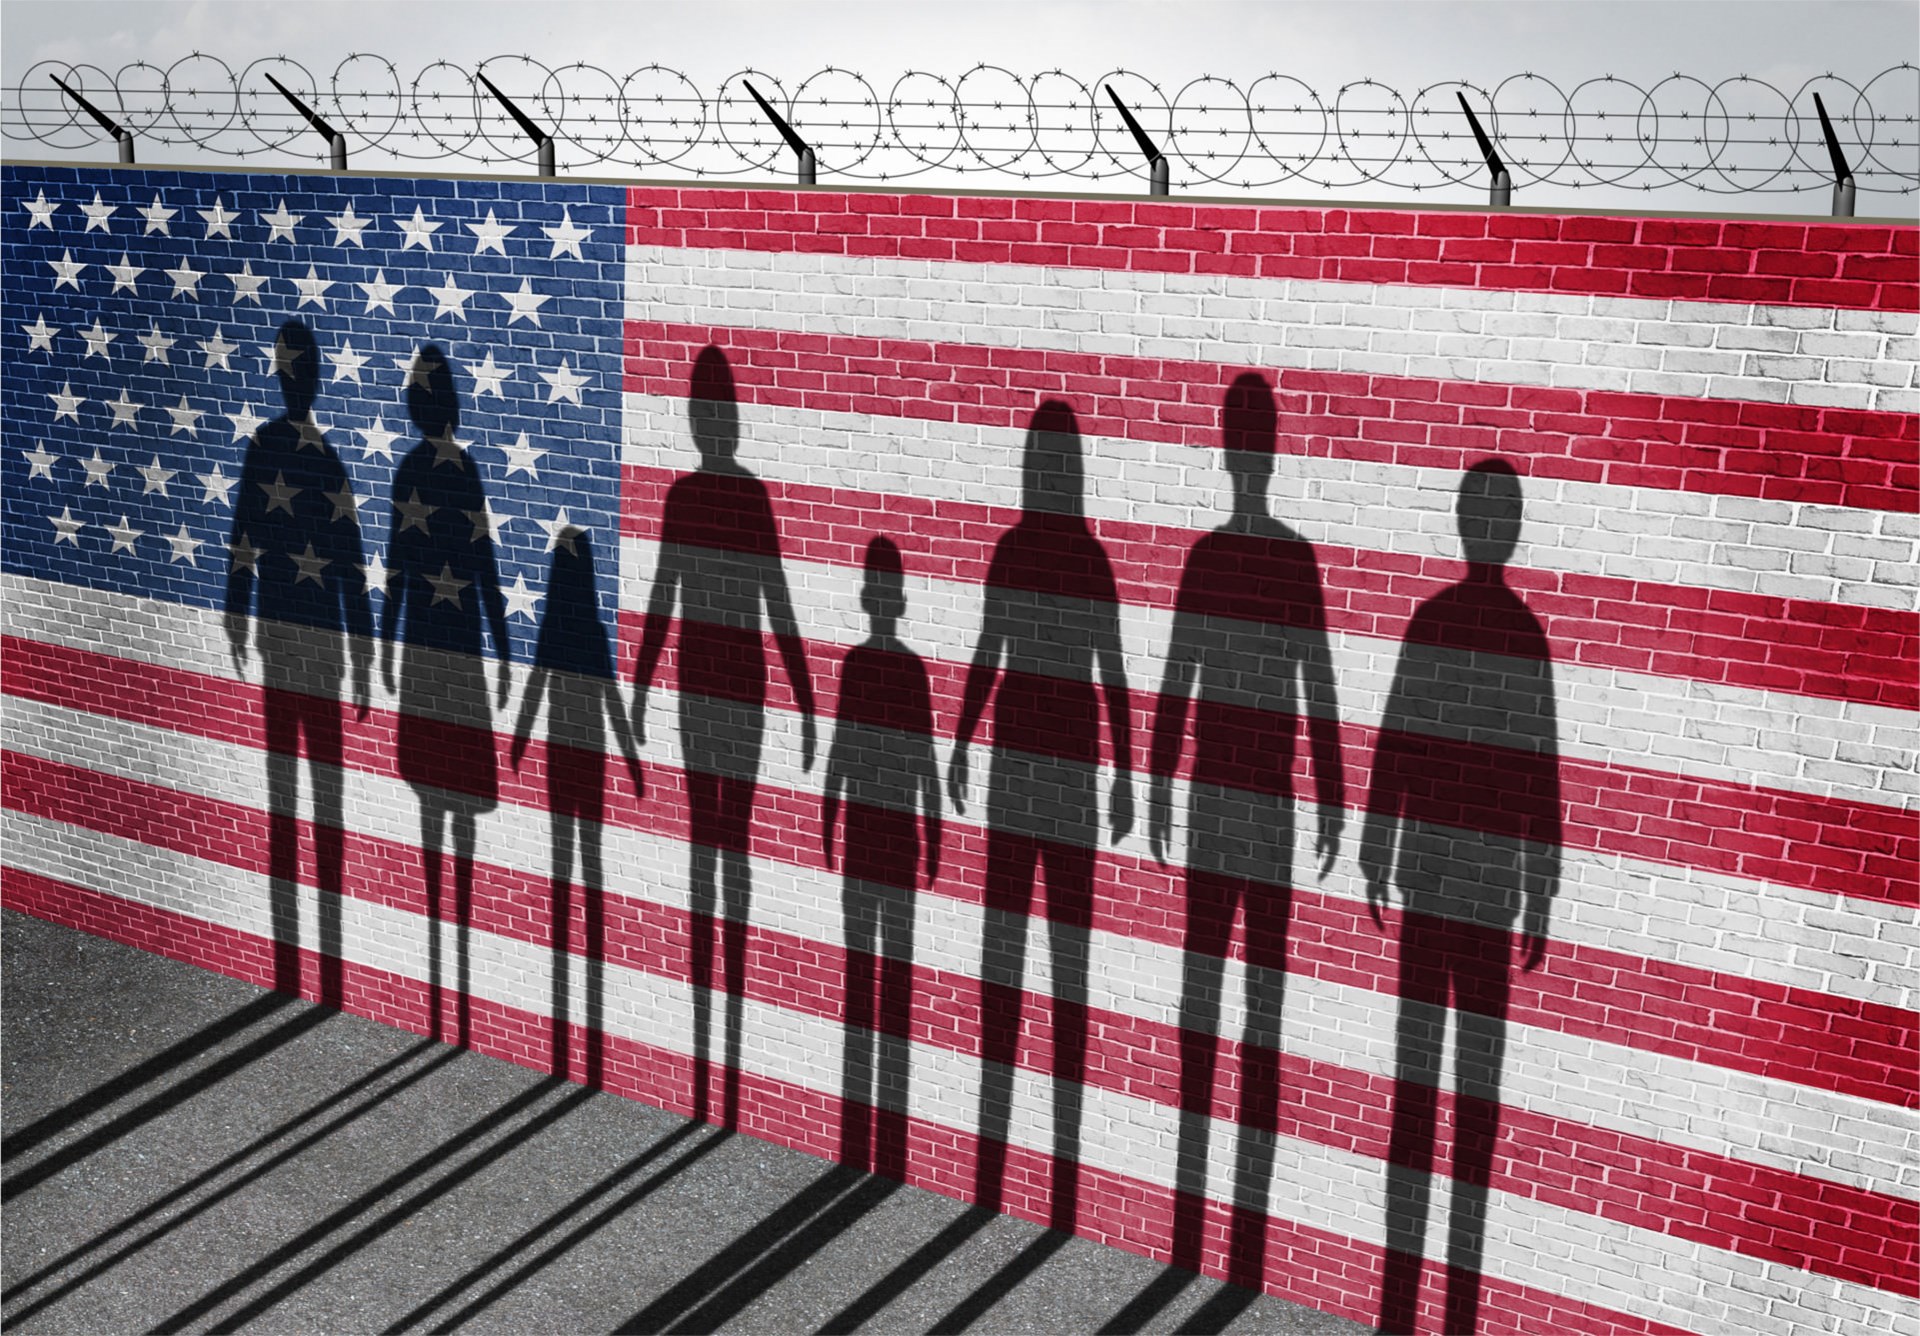 Why Conservatives Are Not Wrong about Their Anti-Immigration Views